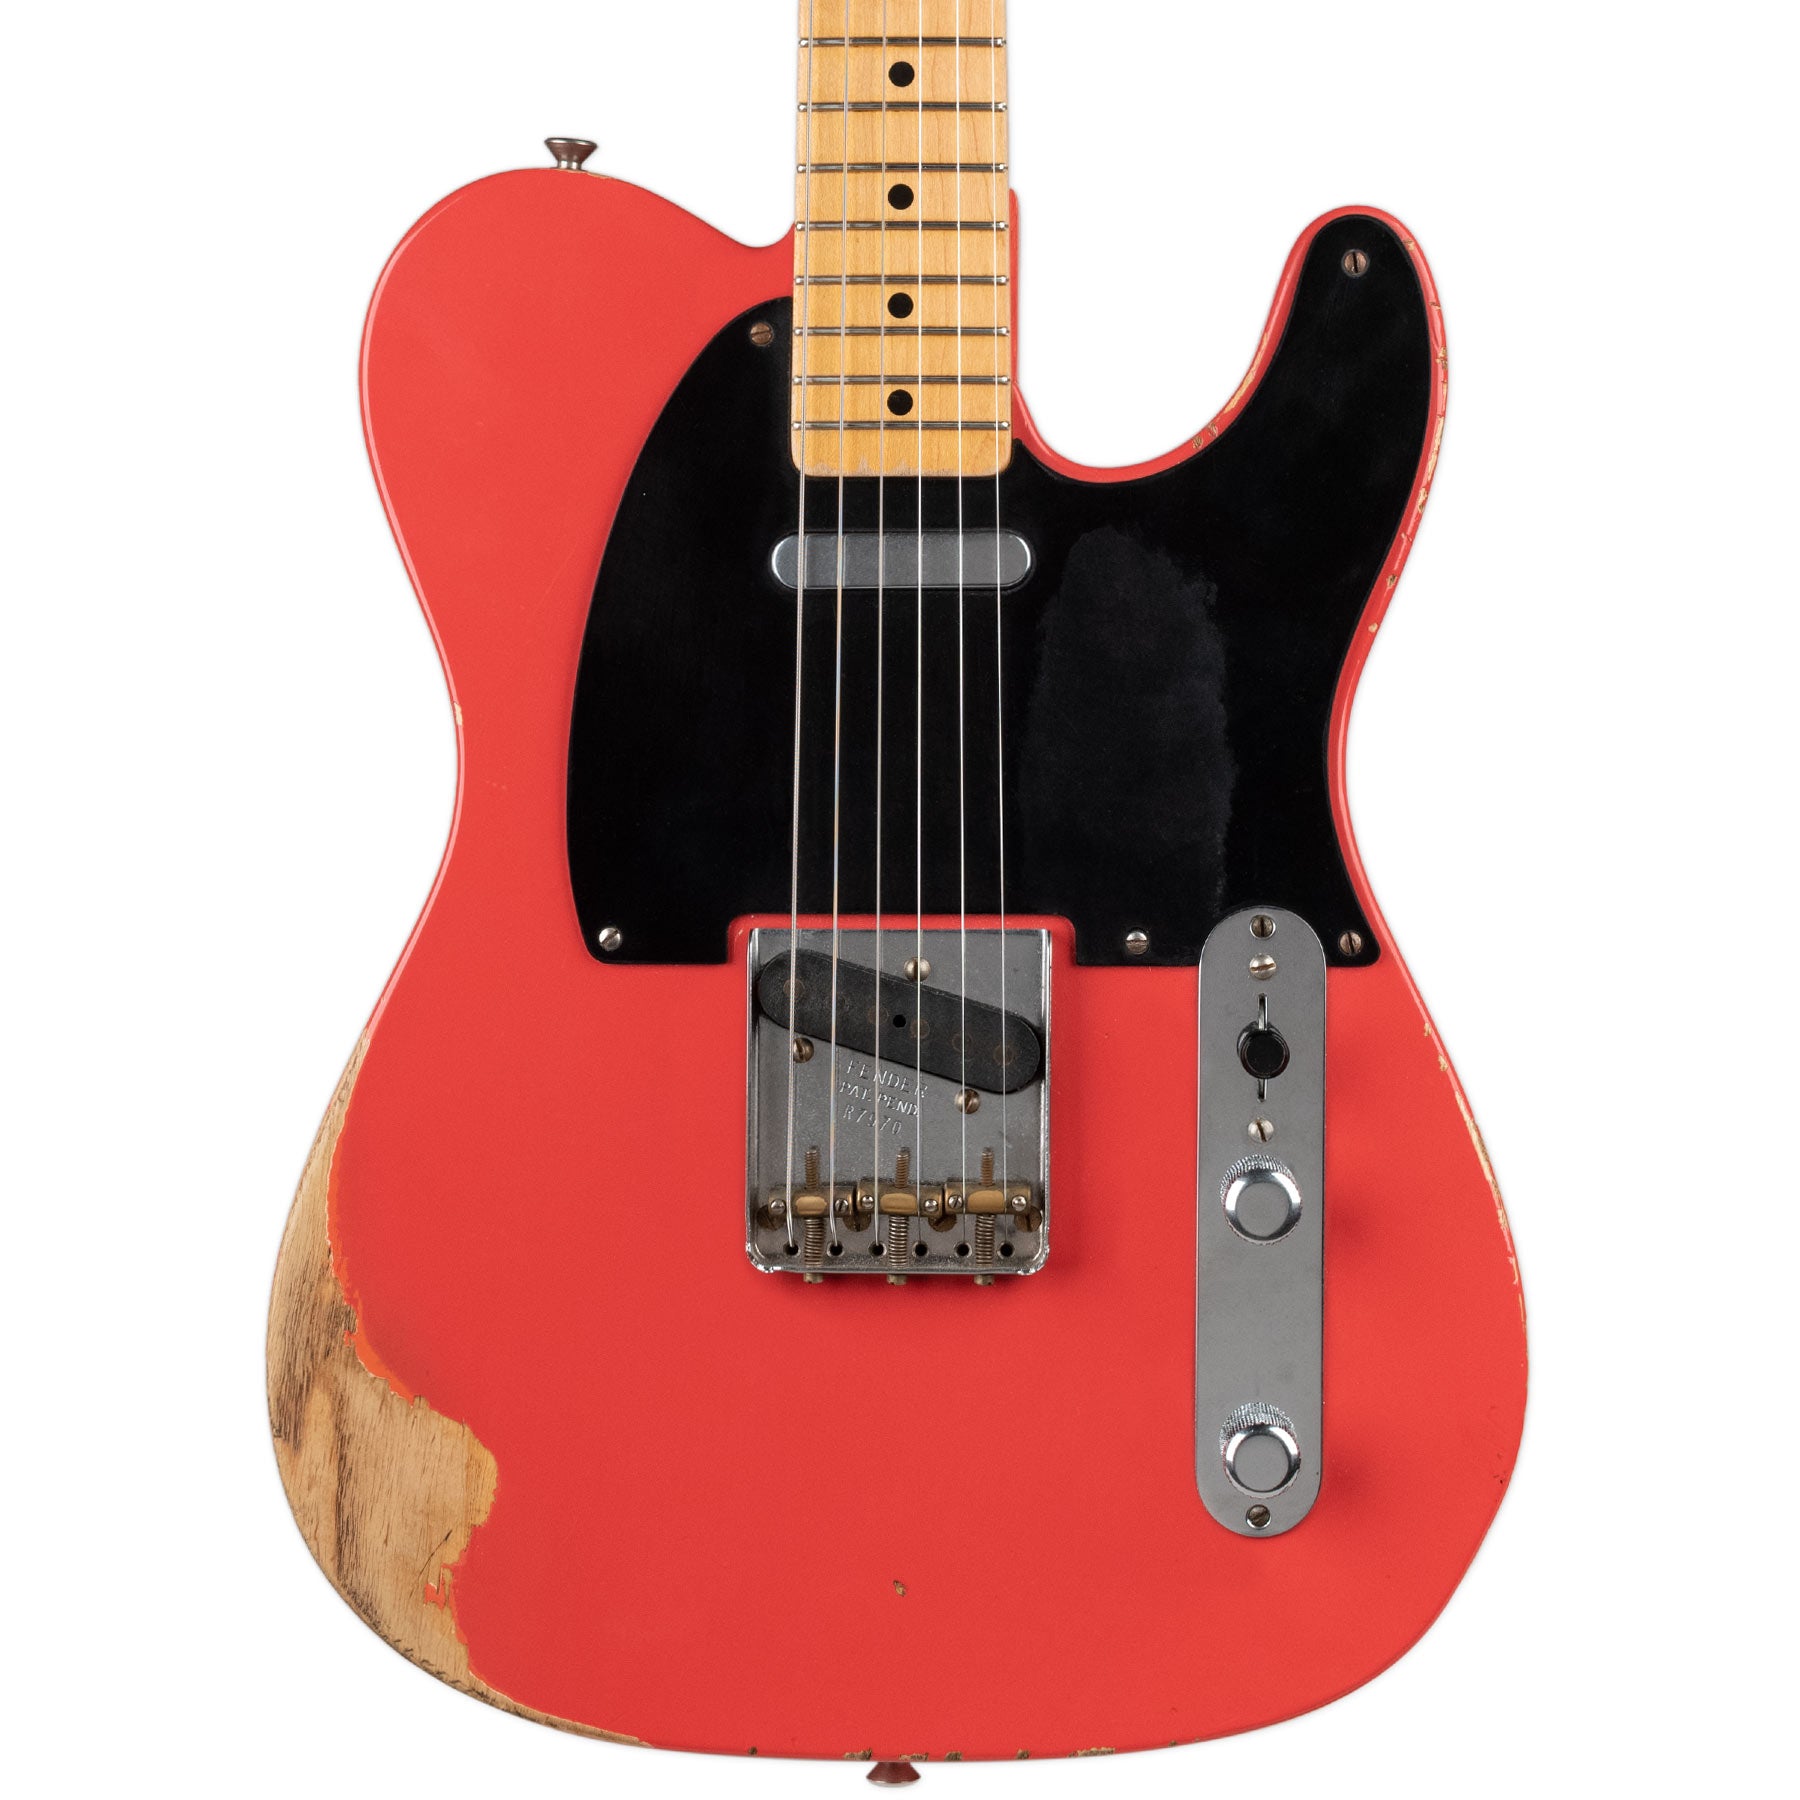 USED FENDER CUSTOM SHOP '51 NOCASTER RELIC - FIESTA RED WITH TWEED THERMOMETER CASE AND COA